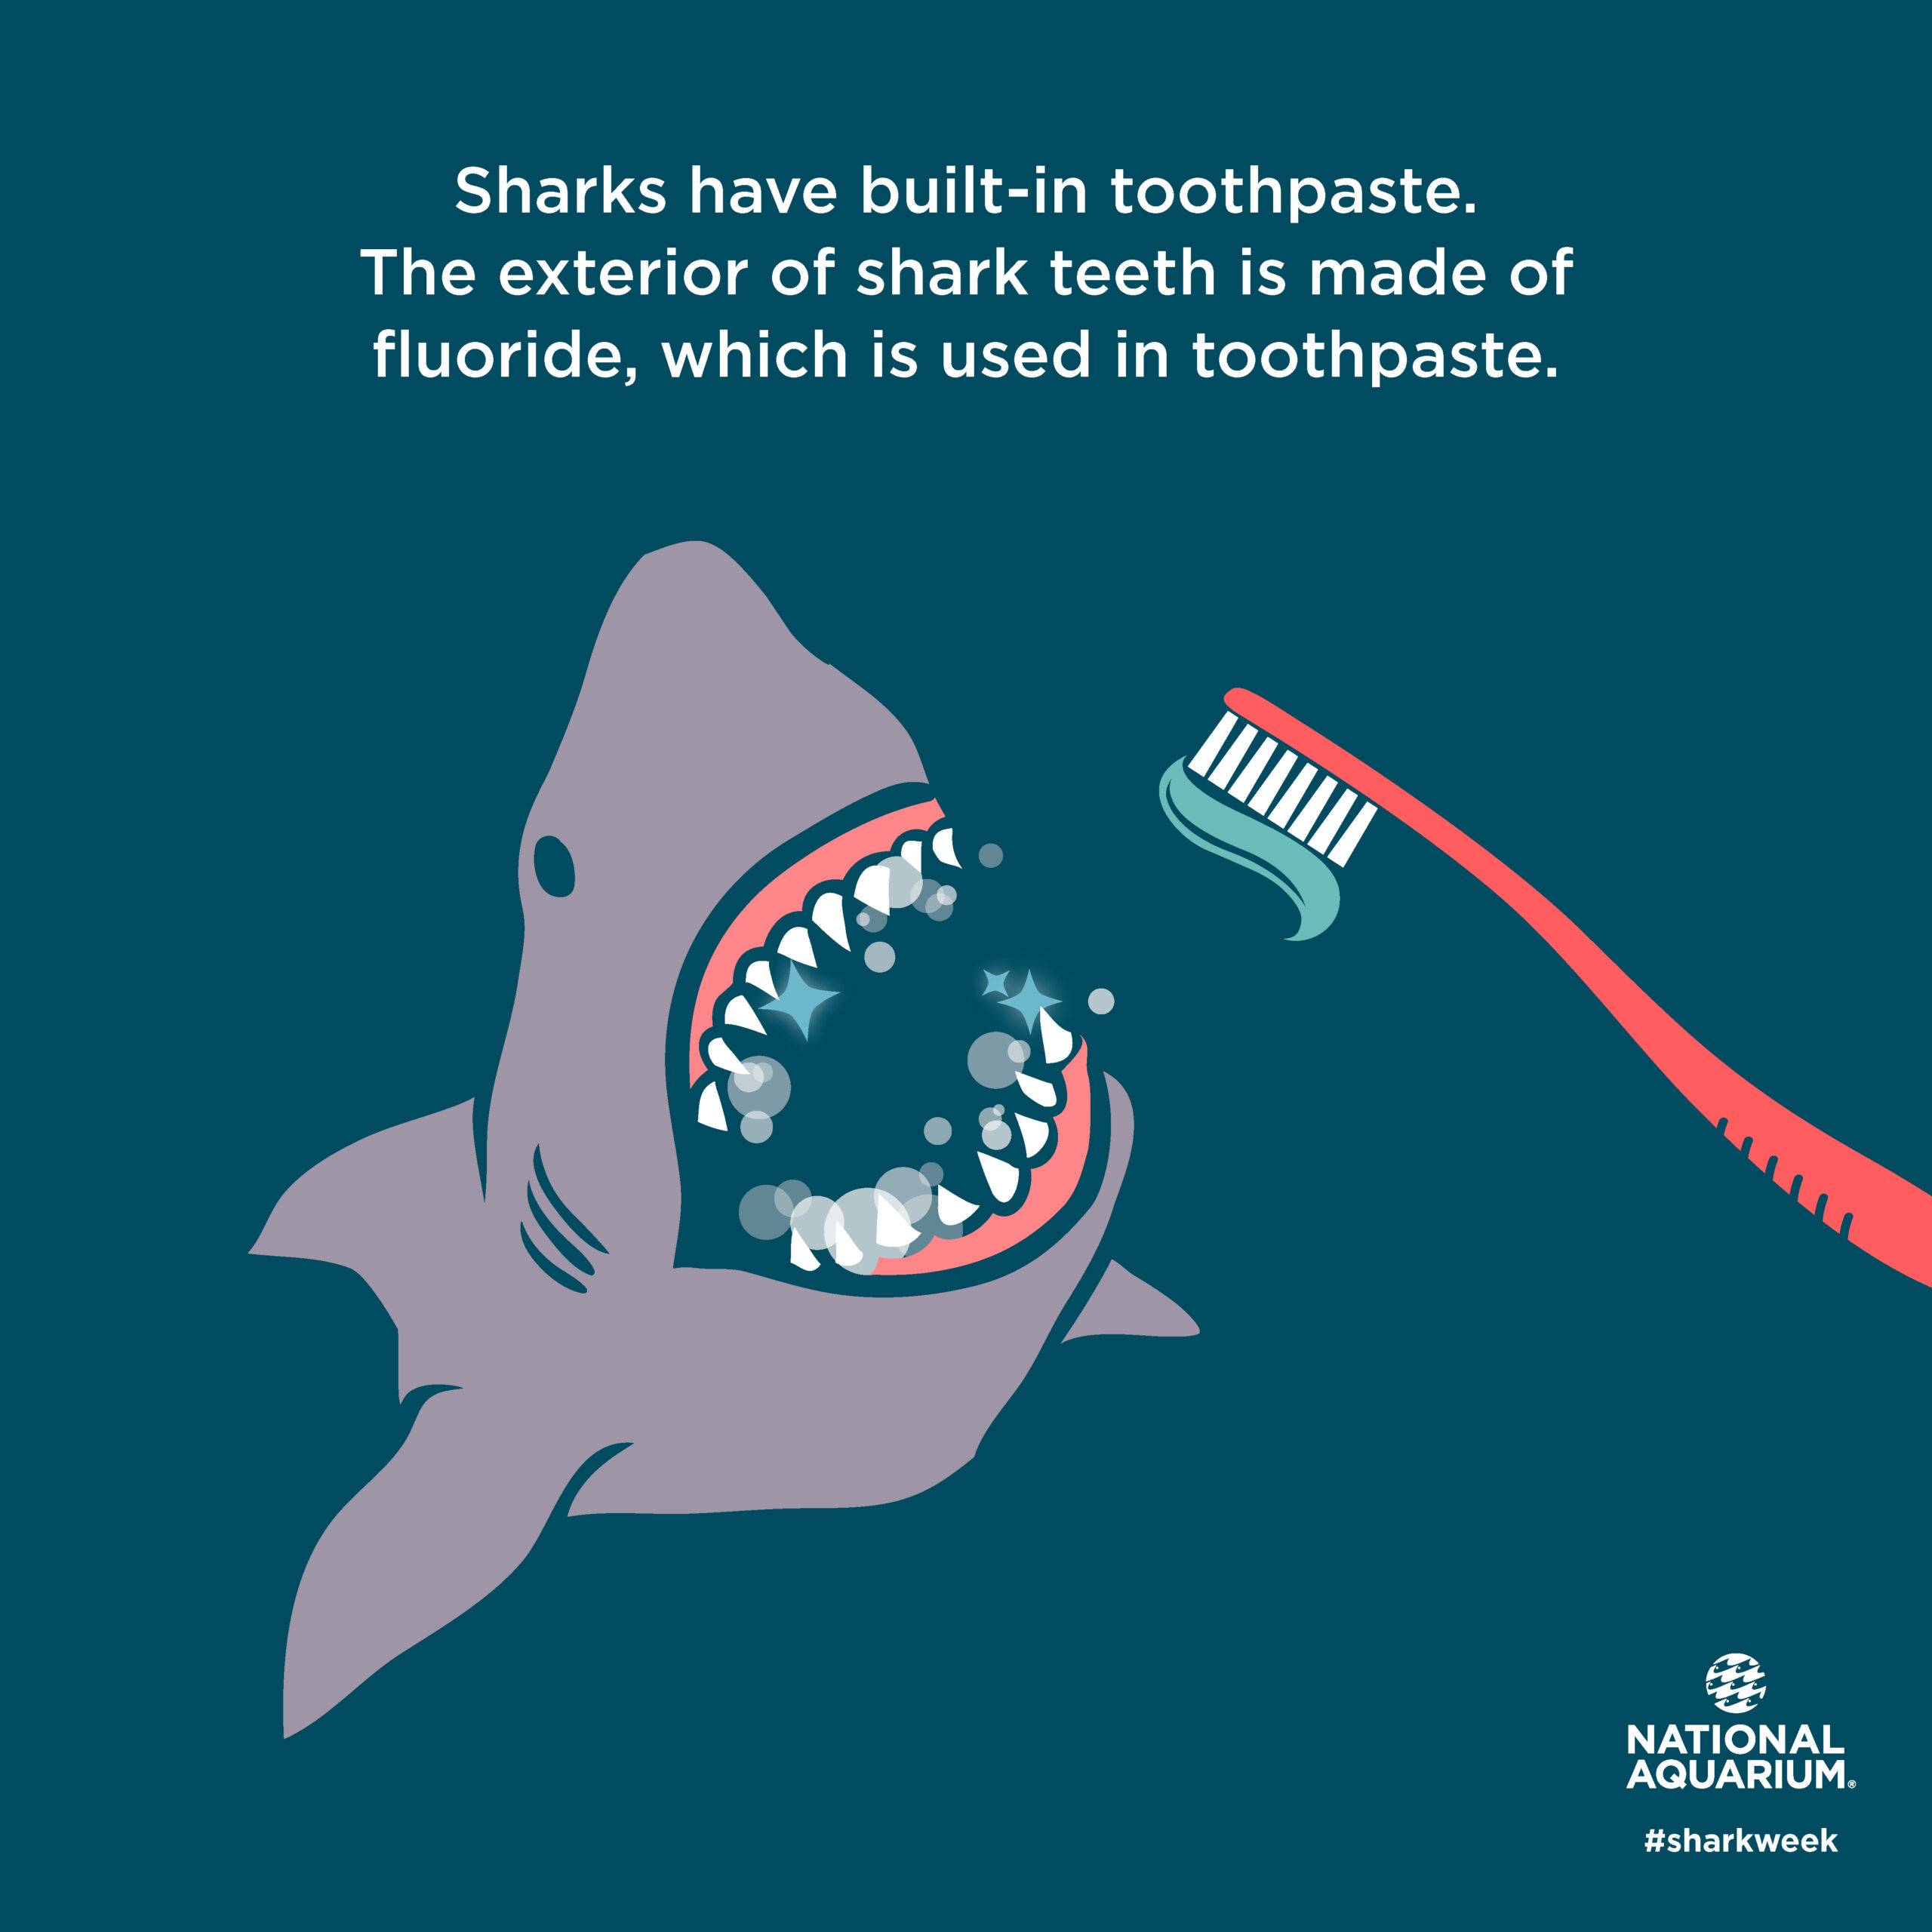 Sharks have built-in toothpaste which is used in toothpaste.